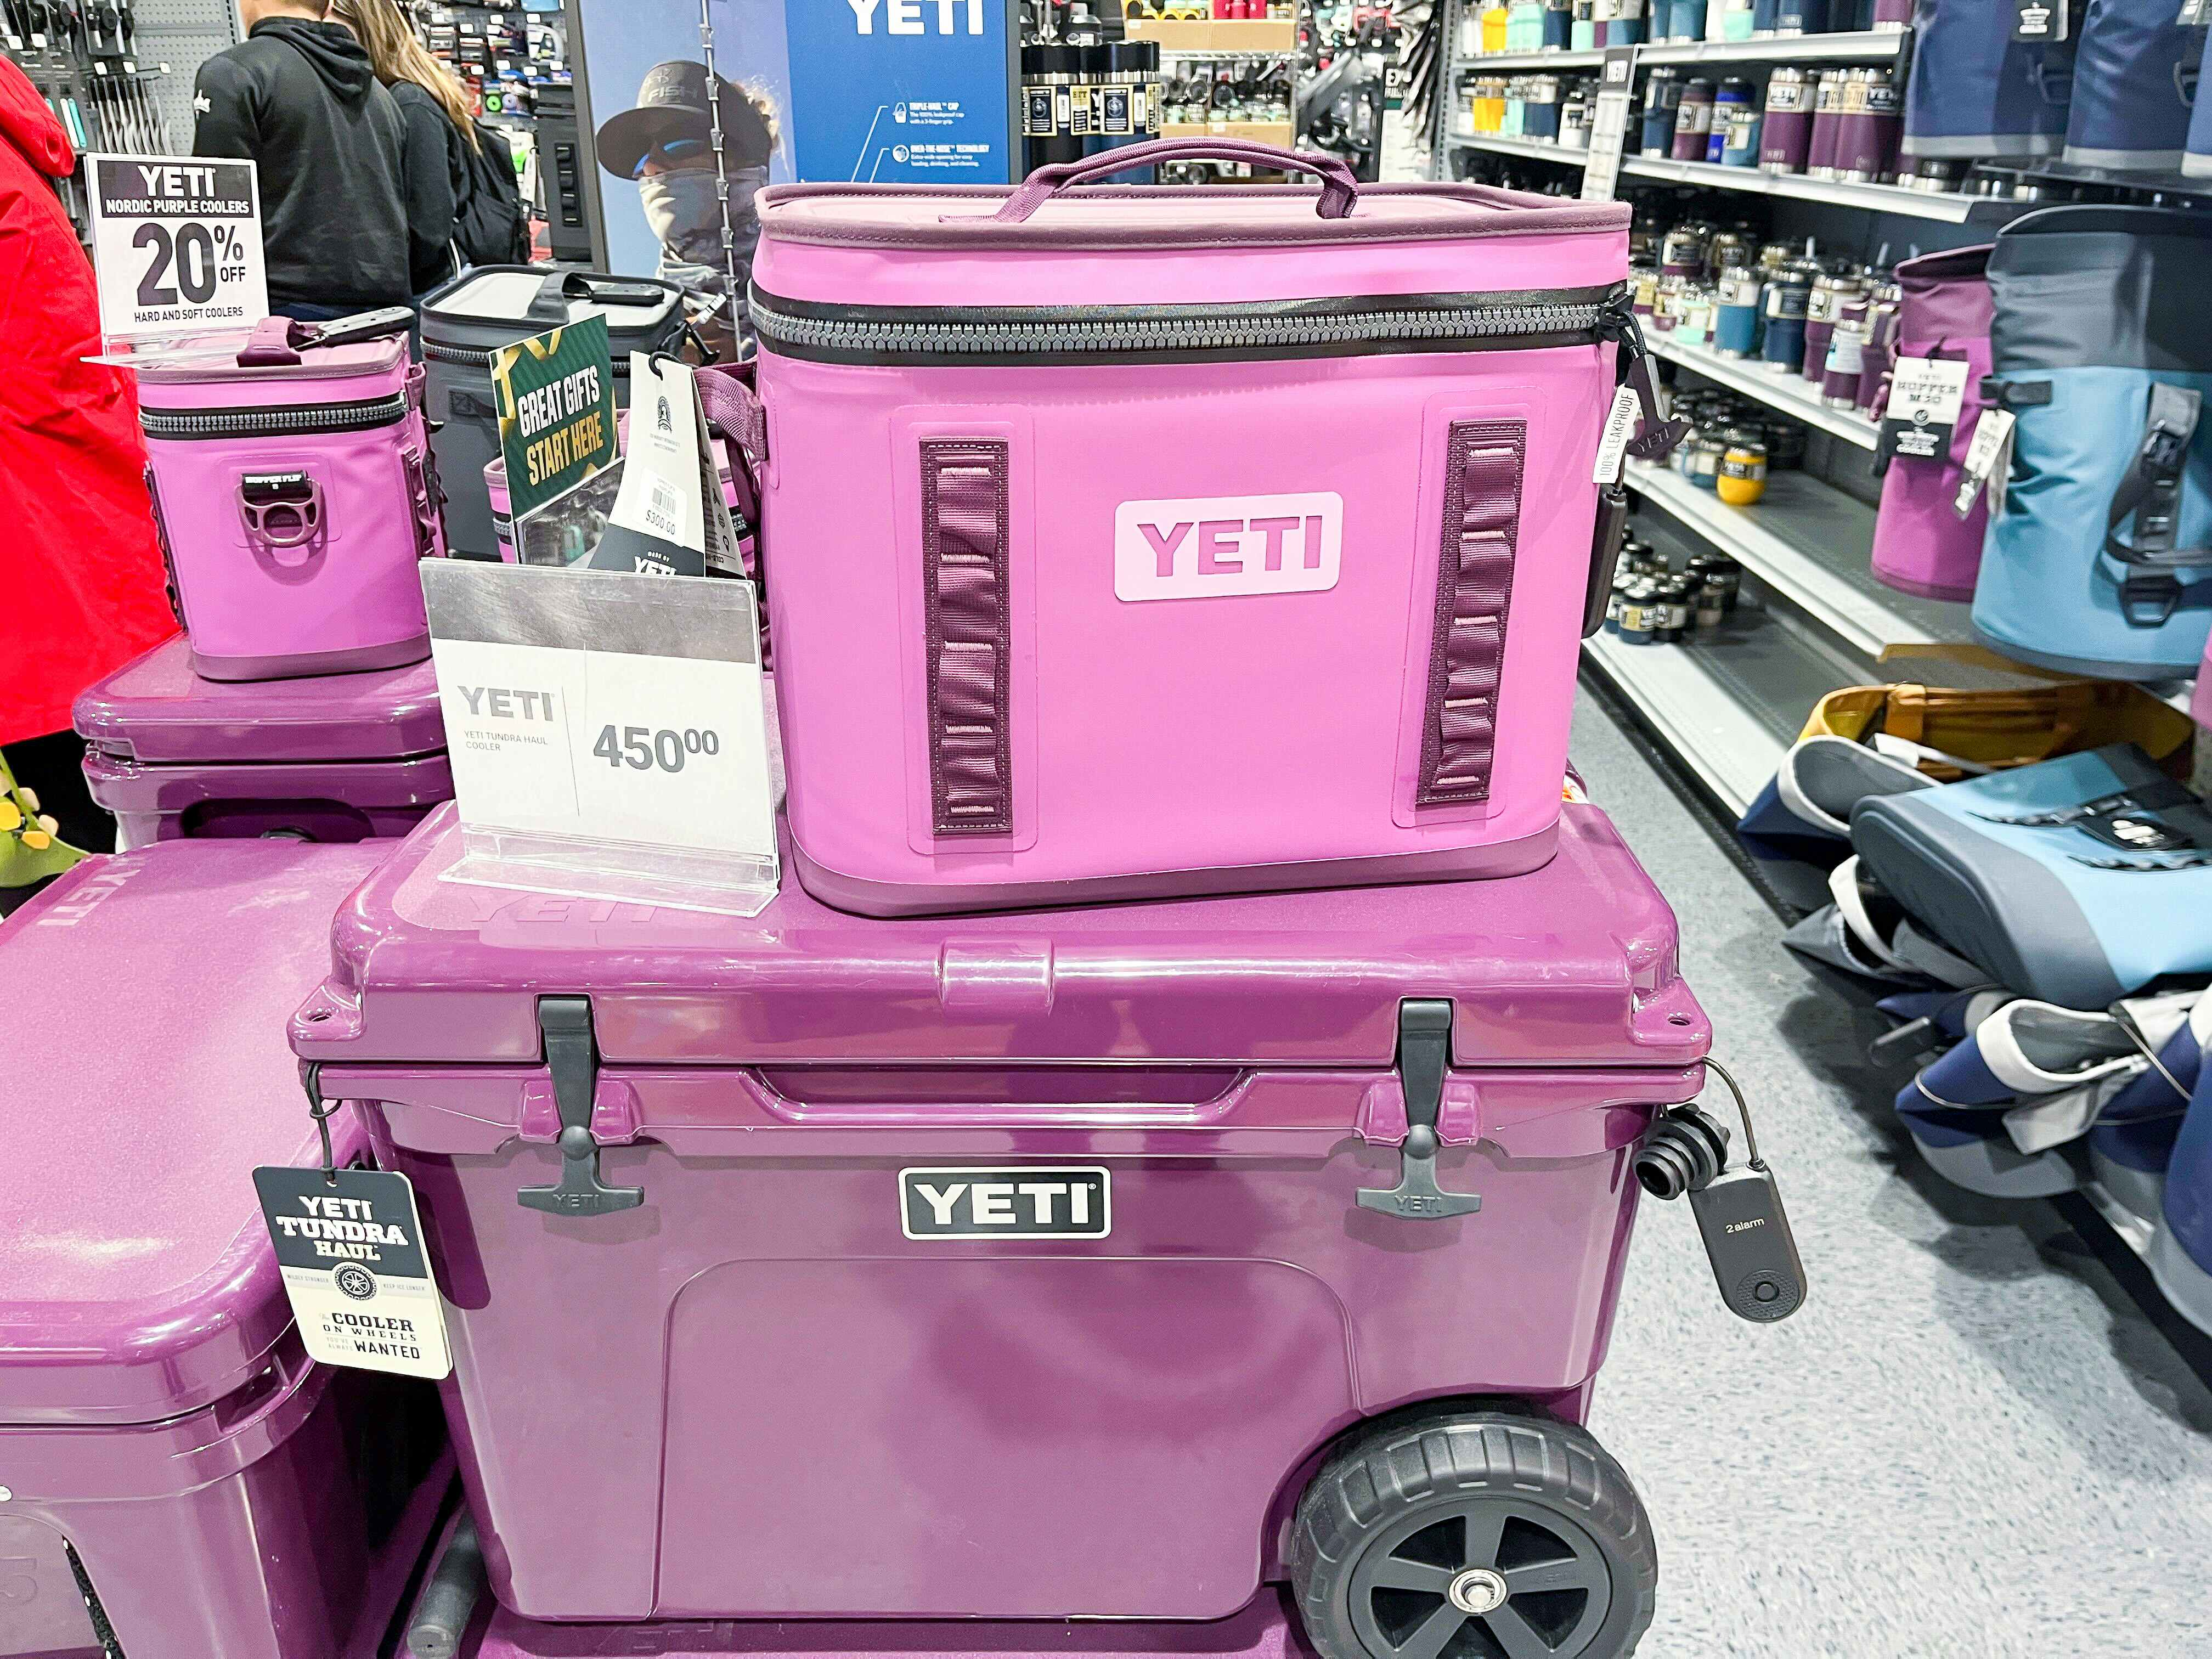 Dick's Sporting Goods New YETI Colors For 2022 - The Market Place